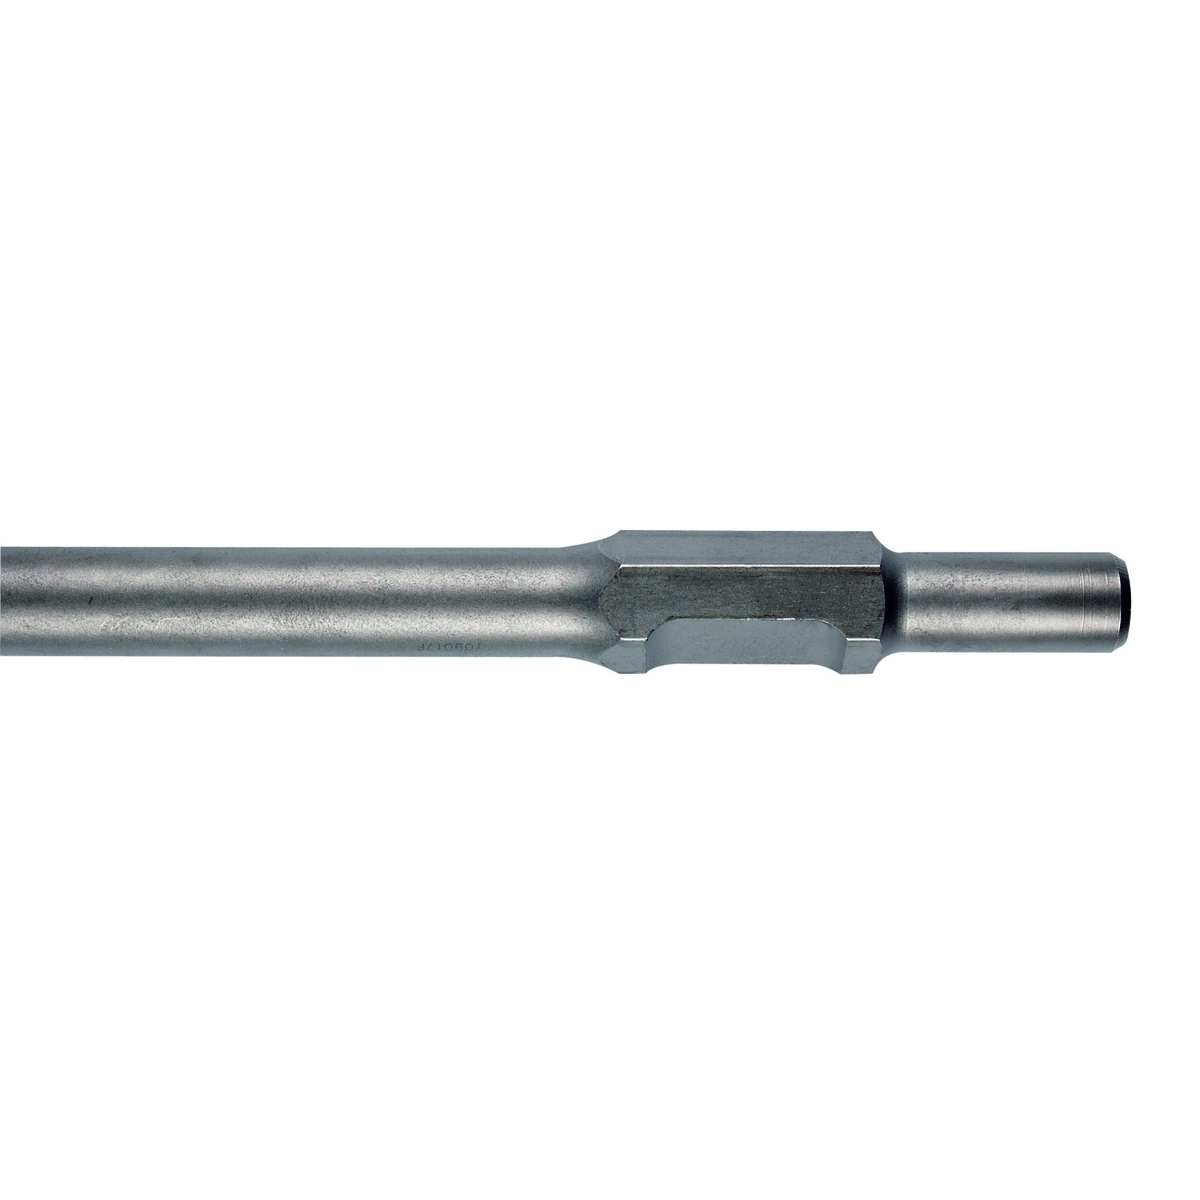 751522 COLD CHISEL 36X400MM